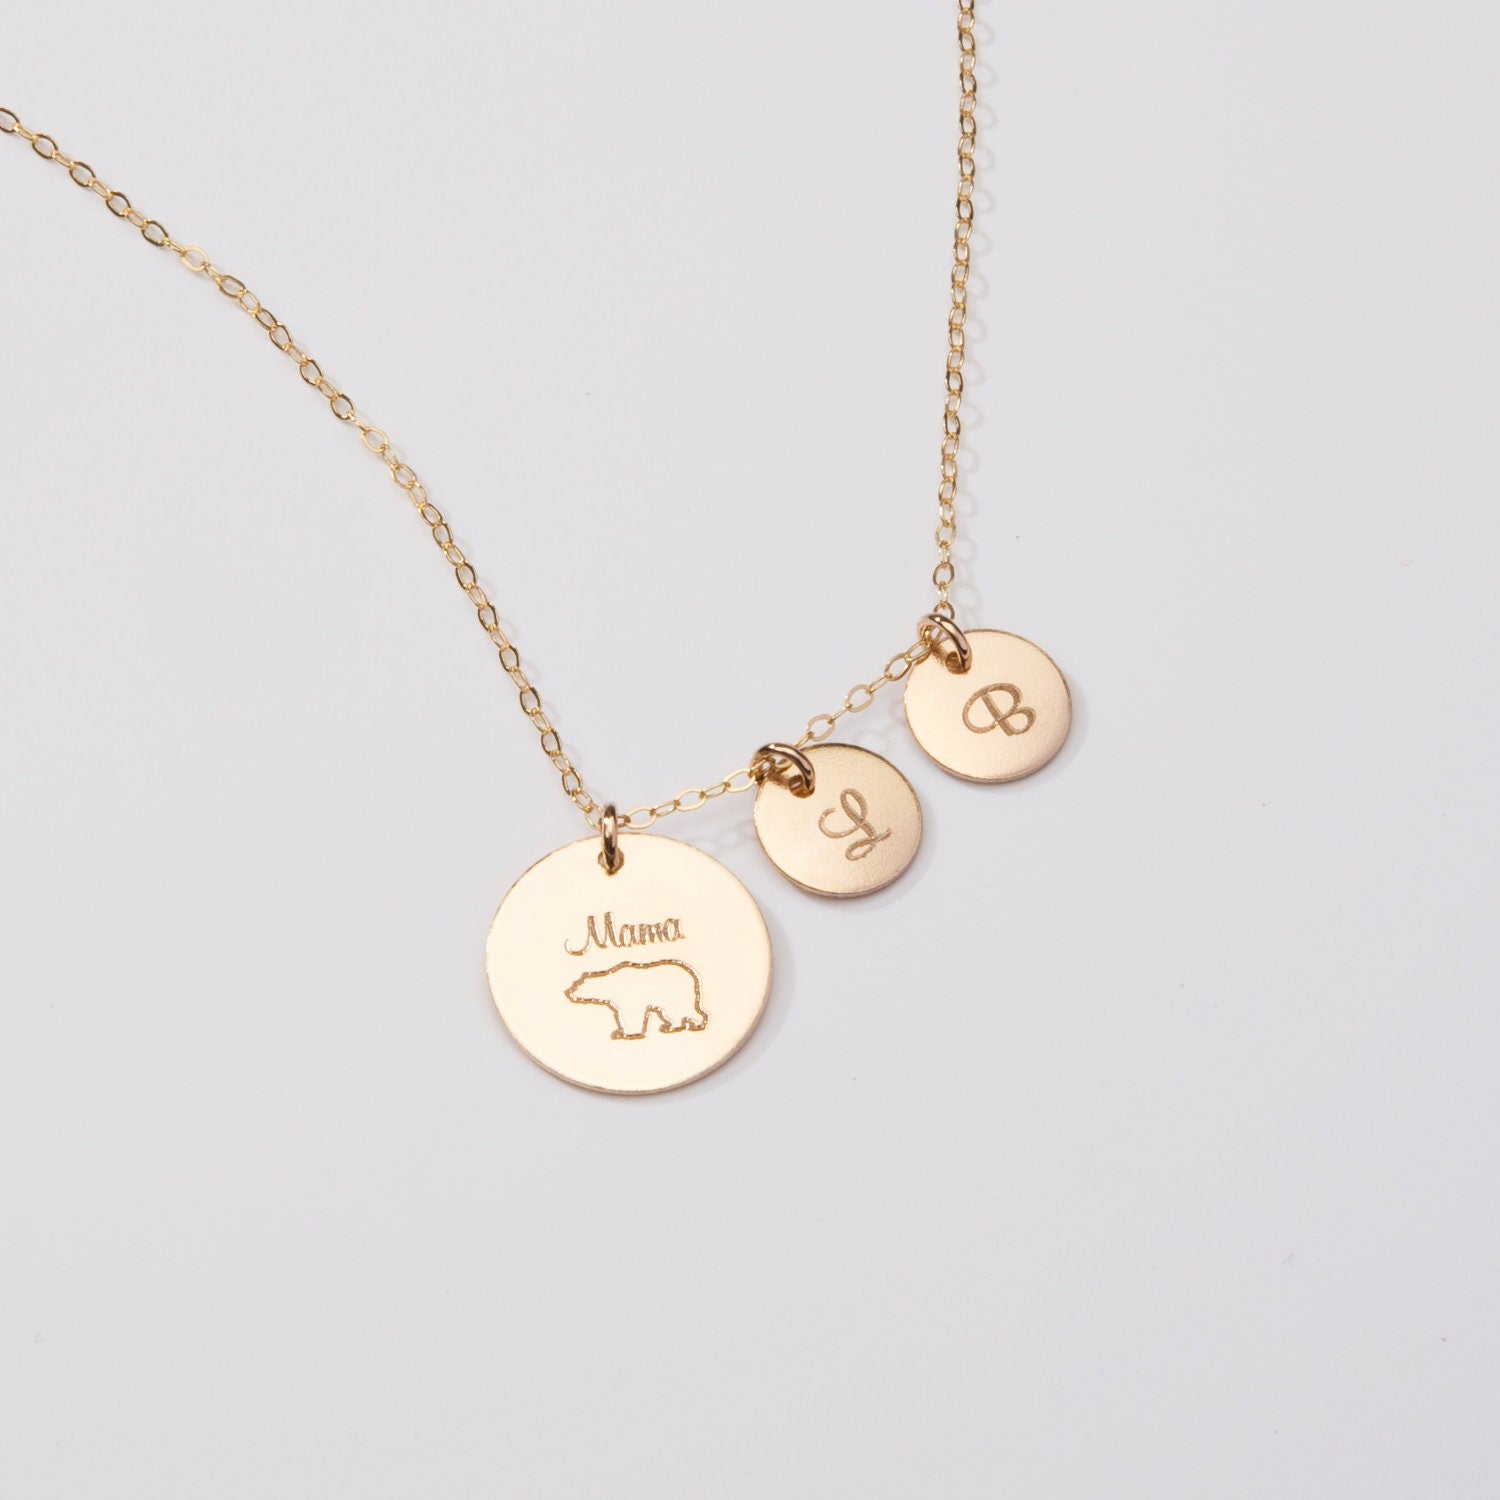 All About Initial Necklaces – Brook & York